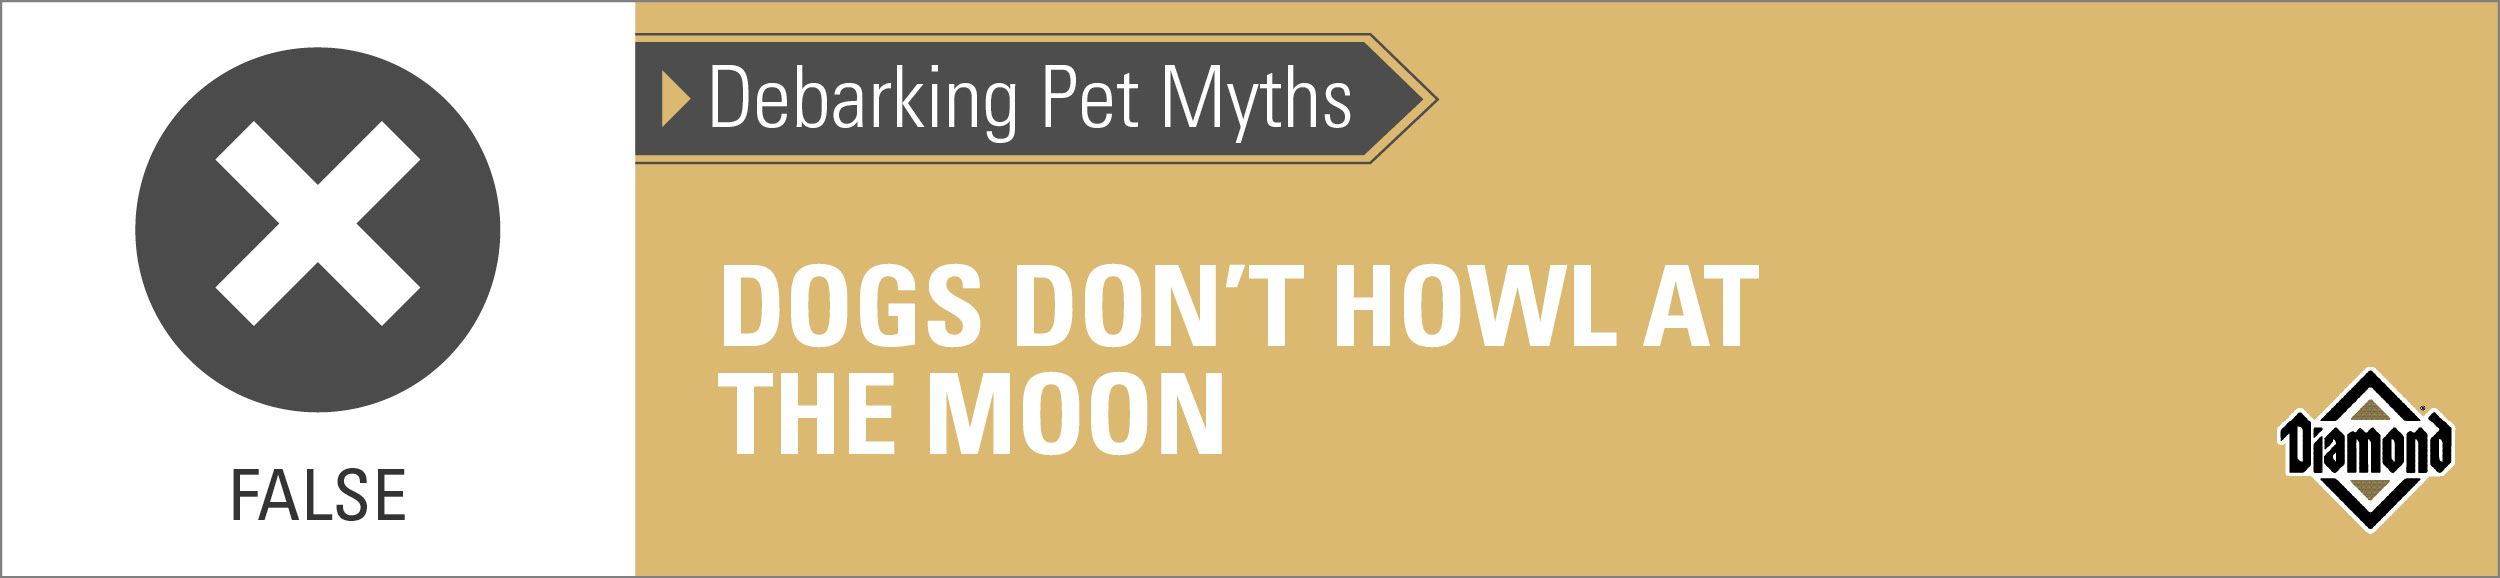 Infographic: Dogs Don’t Howl at the Moon | Diamond Pet Foods